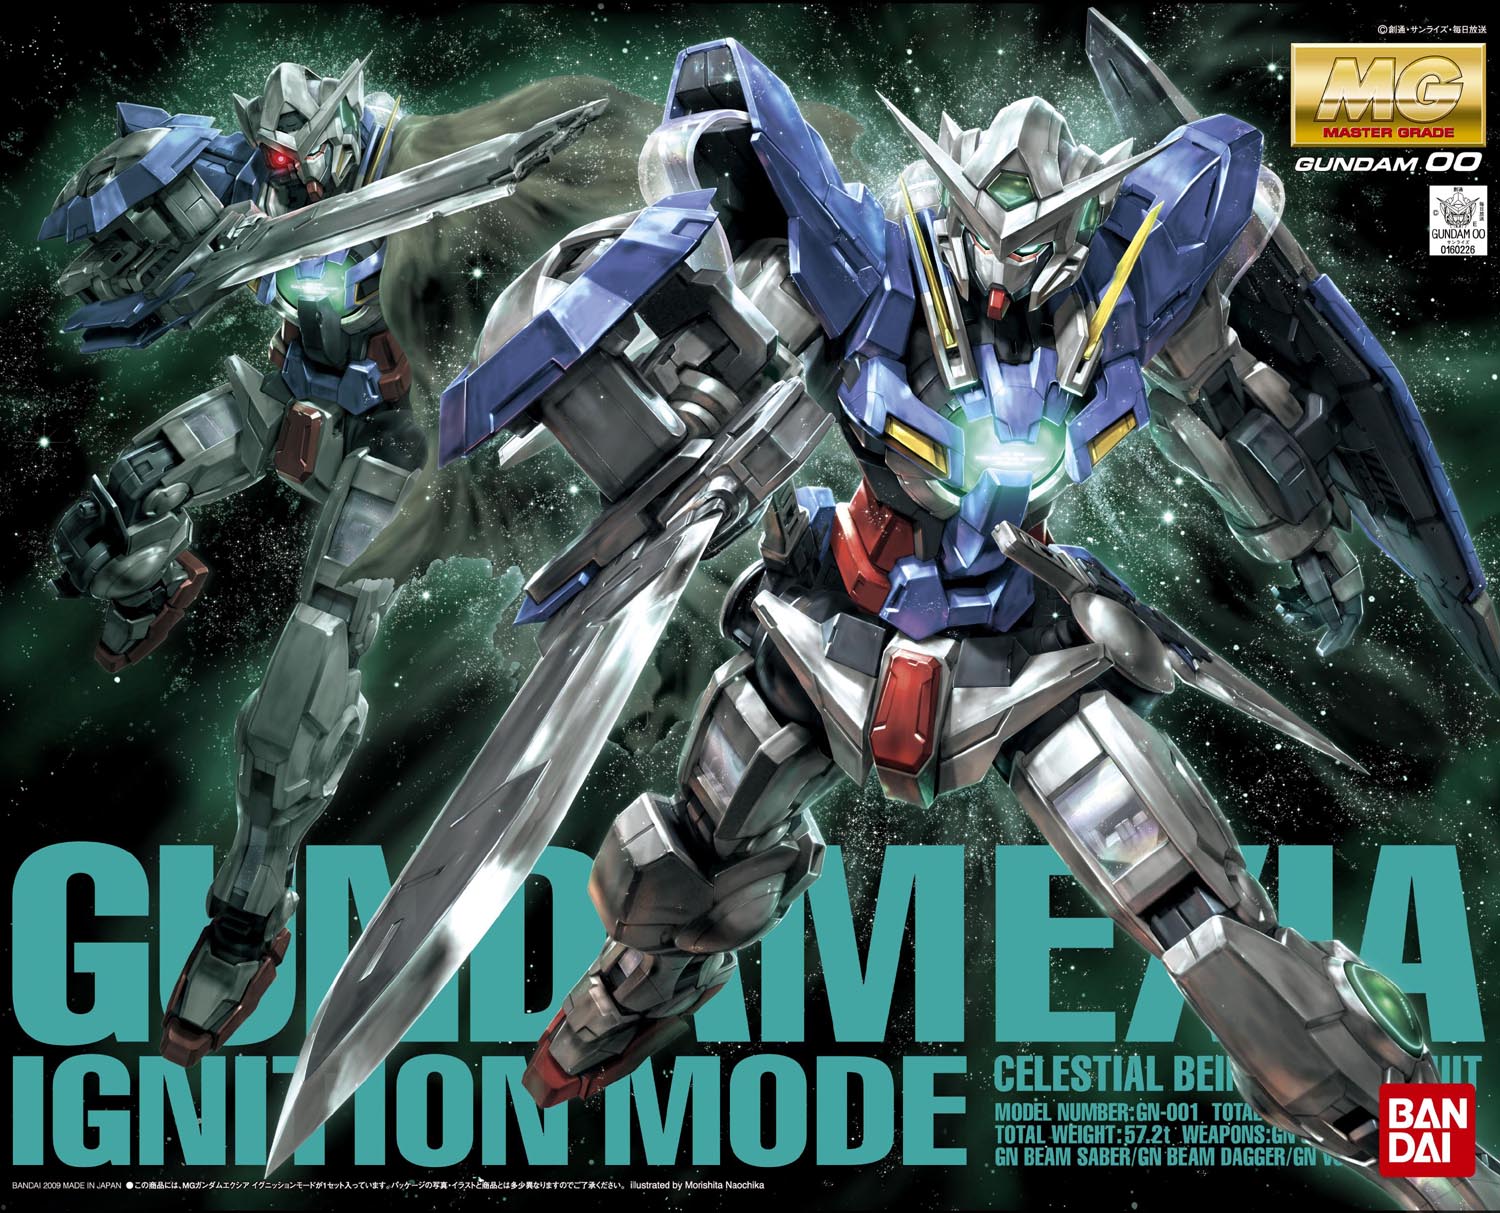 Celestial Being Mobile Suit GN-001 Model NEW 1/100 Gundam Exia Ignition Mode